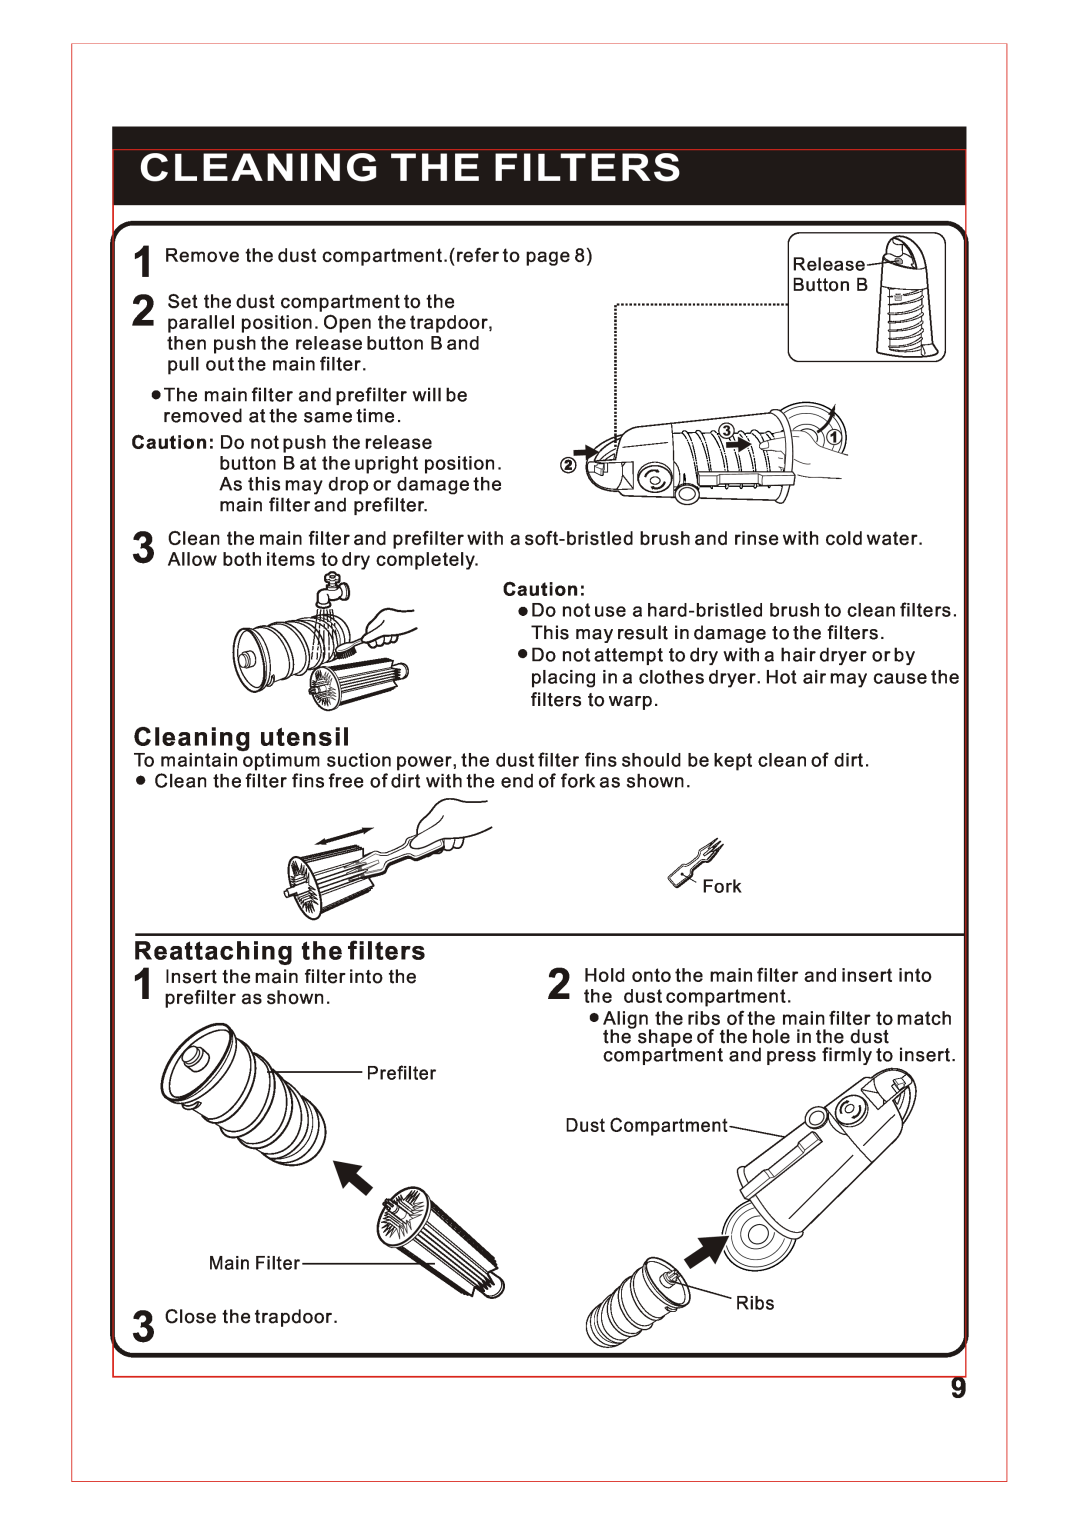 Fantom Vacuum FM740 instruction manual Cleaning The Filters, Cleaning utensil, Reattaching the filters 